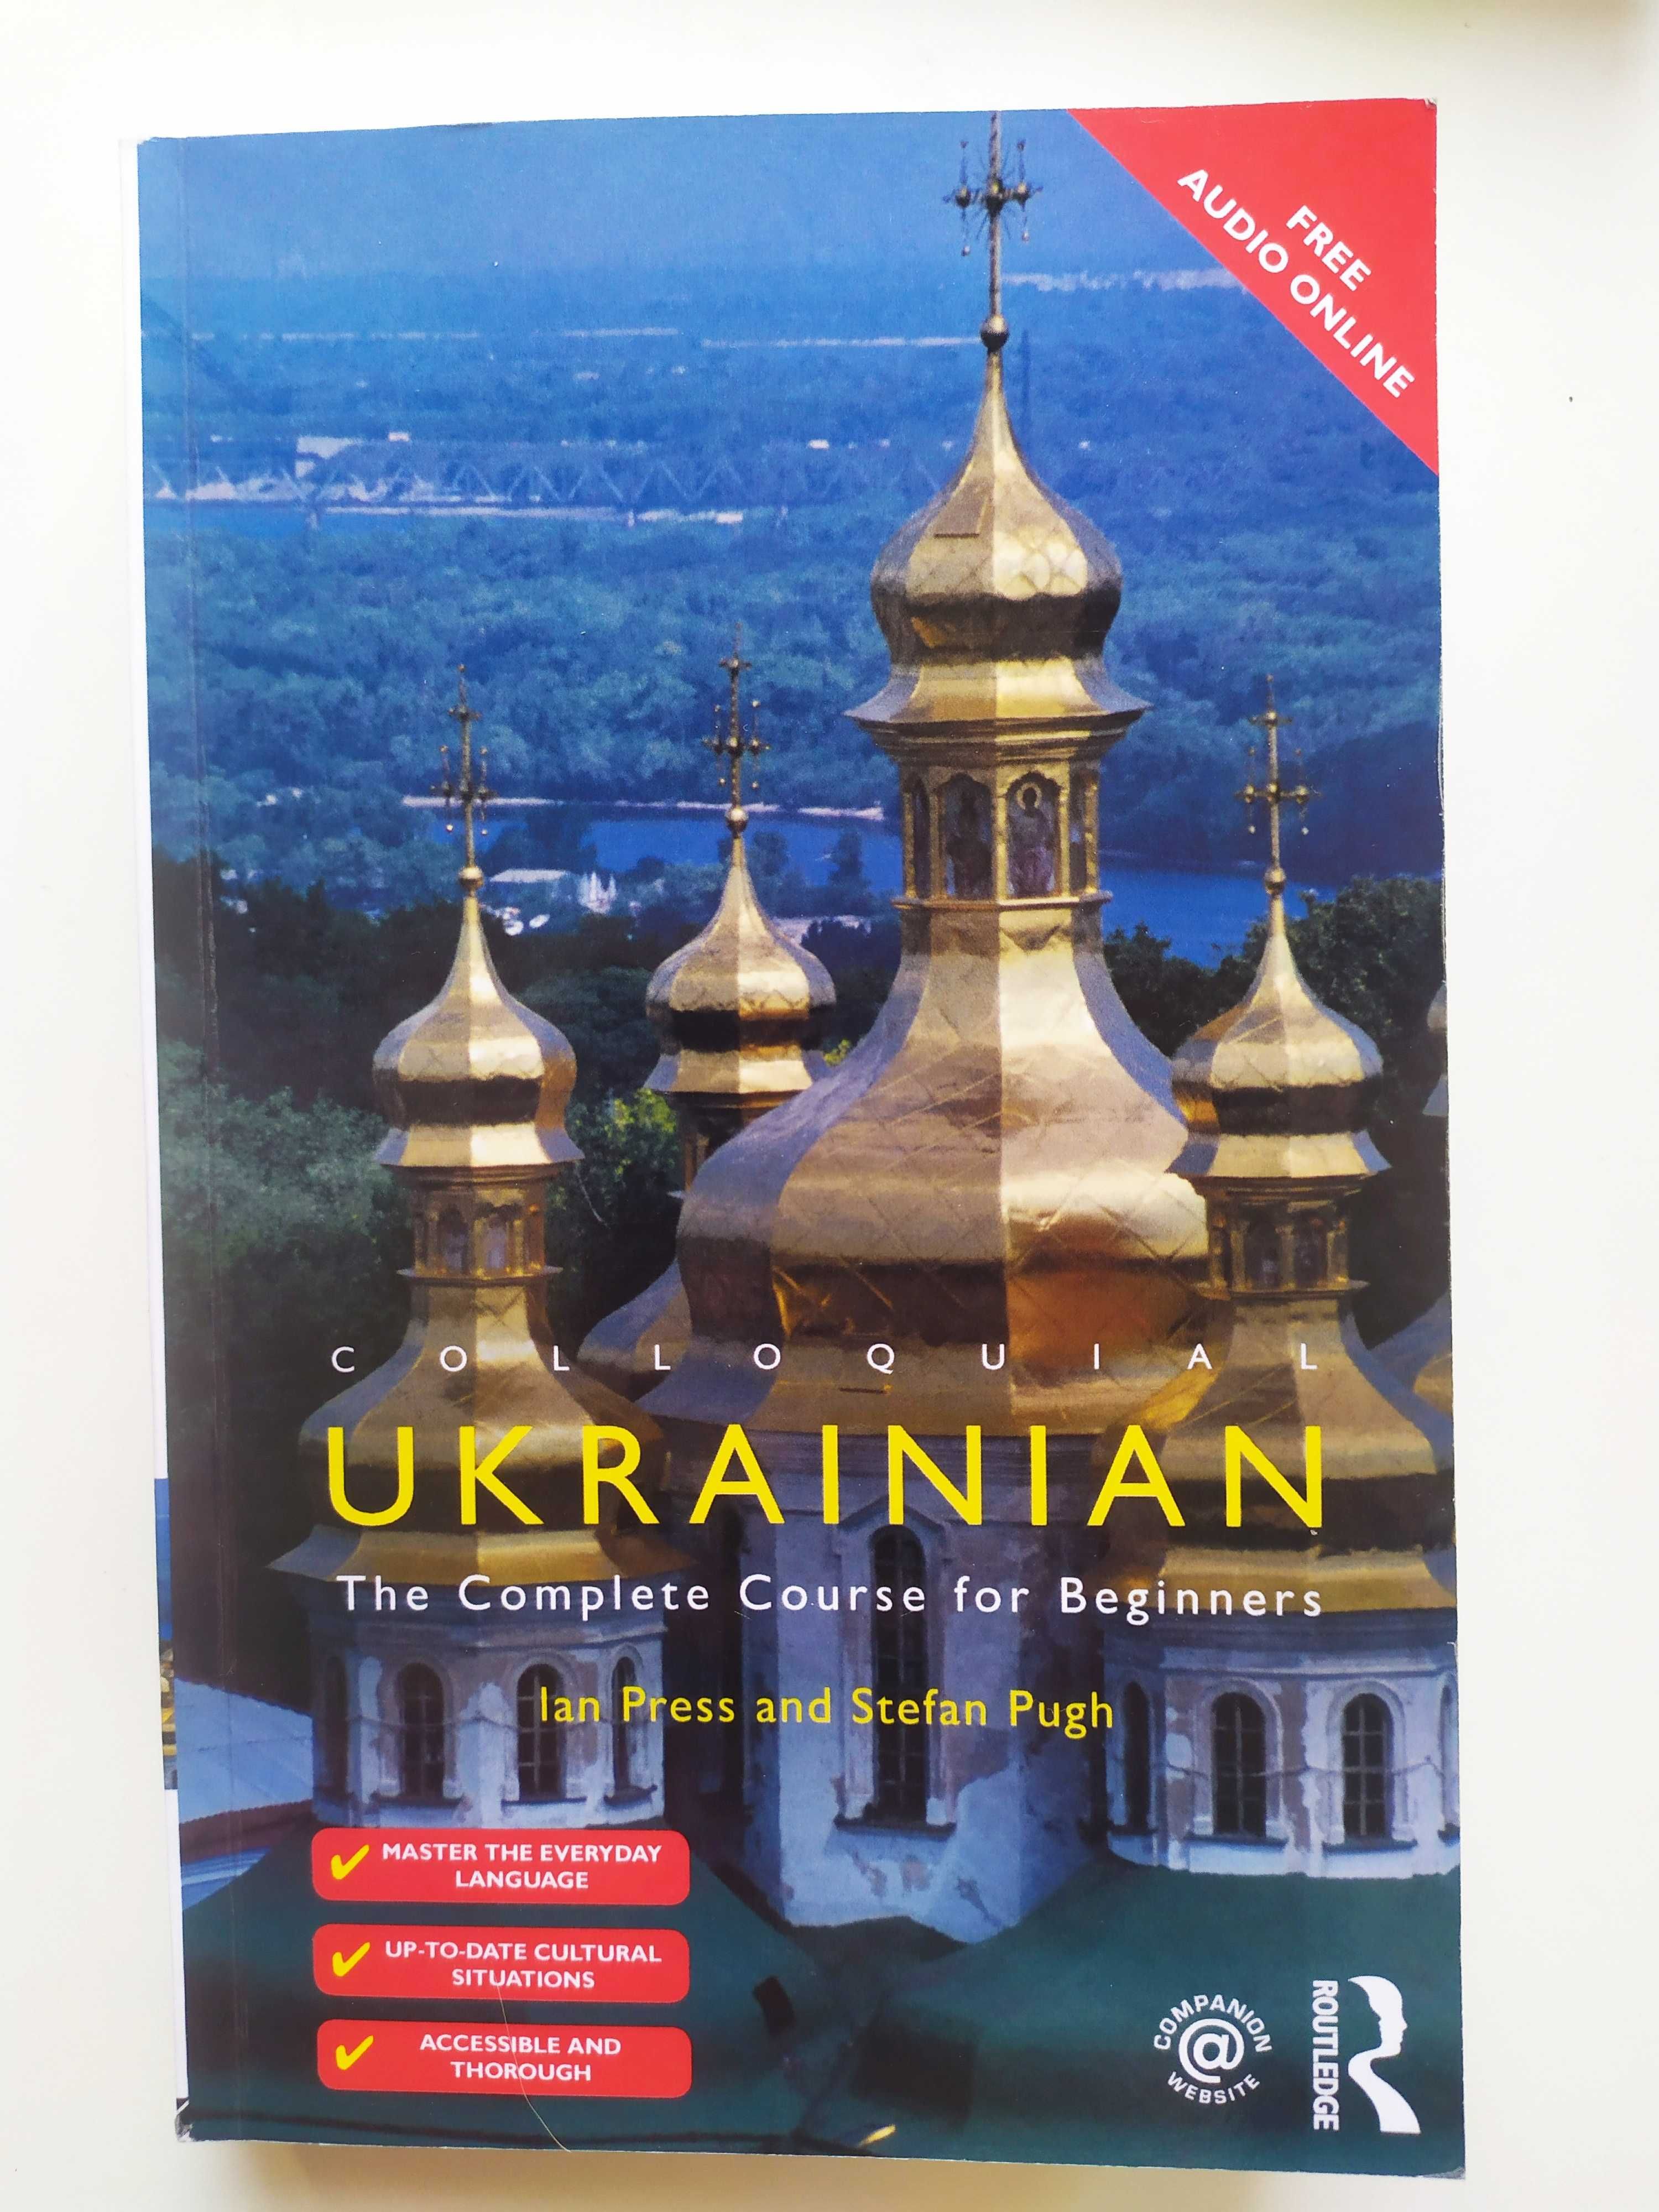 Colloquial Ukrainian: The Complete Course for Beginners